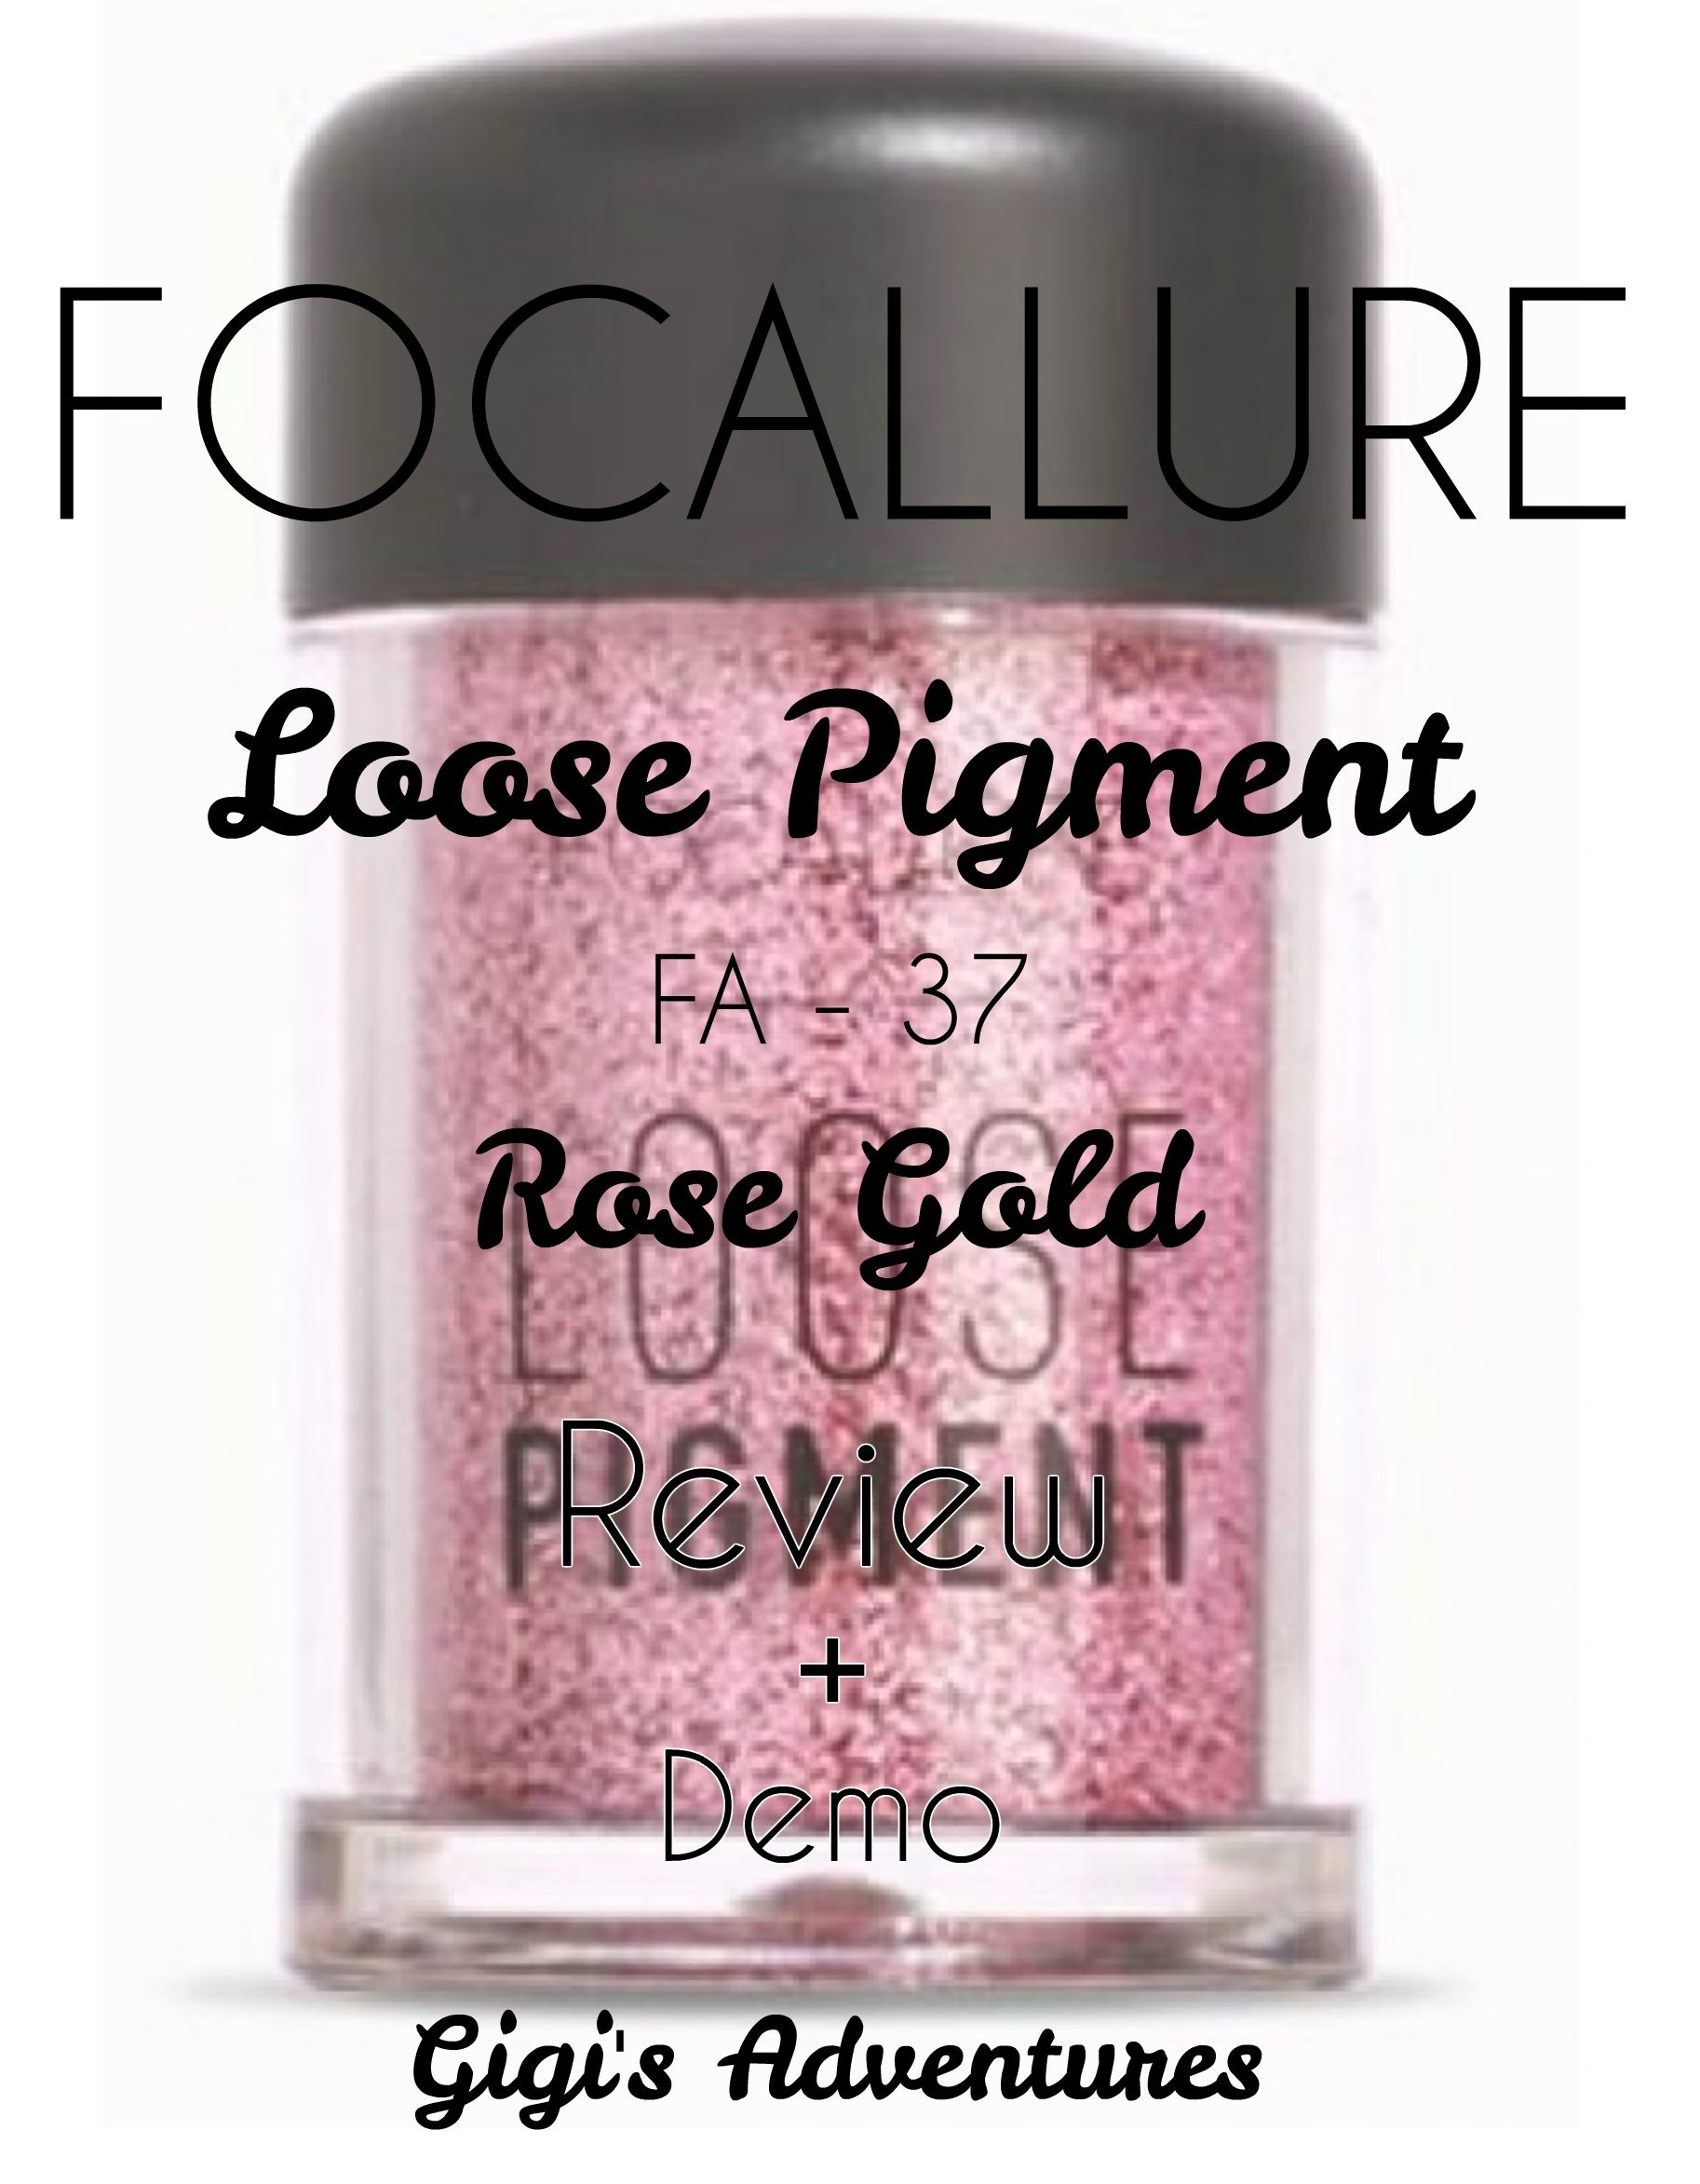 Focallure Loose Pigment FA-37 - 12 Rose Gold Review + Demo